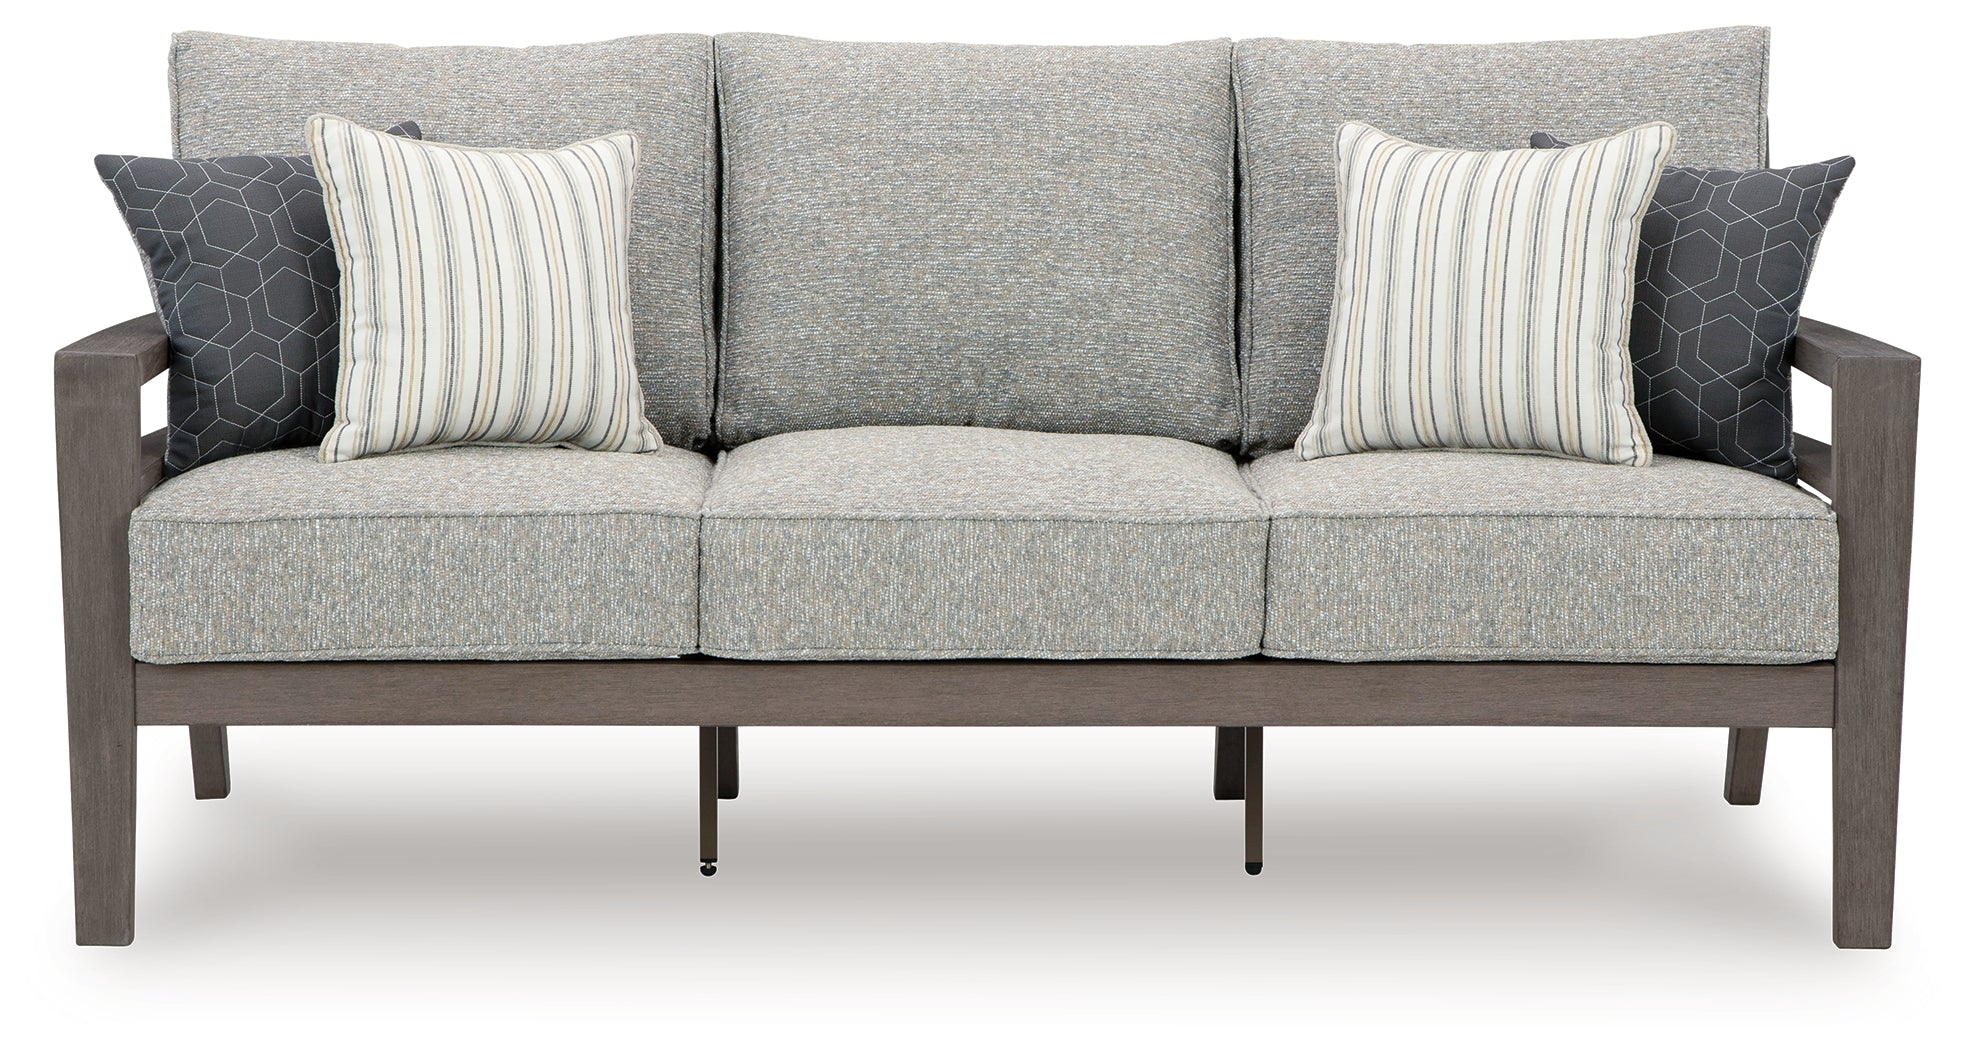 Hillside Barn Gray/Brown Outdoor Sofa with Cushion - P564-838 - Bien Home Furniture &amp; Electronics